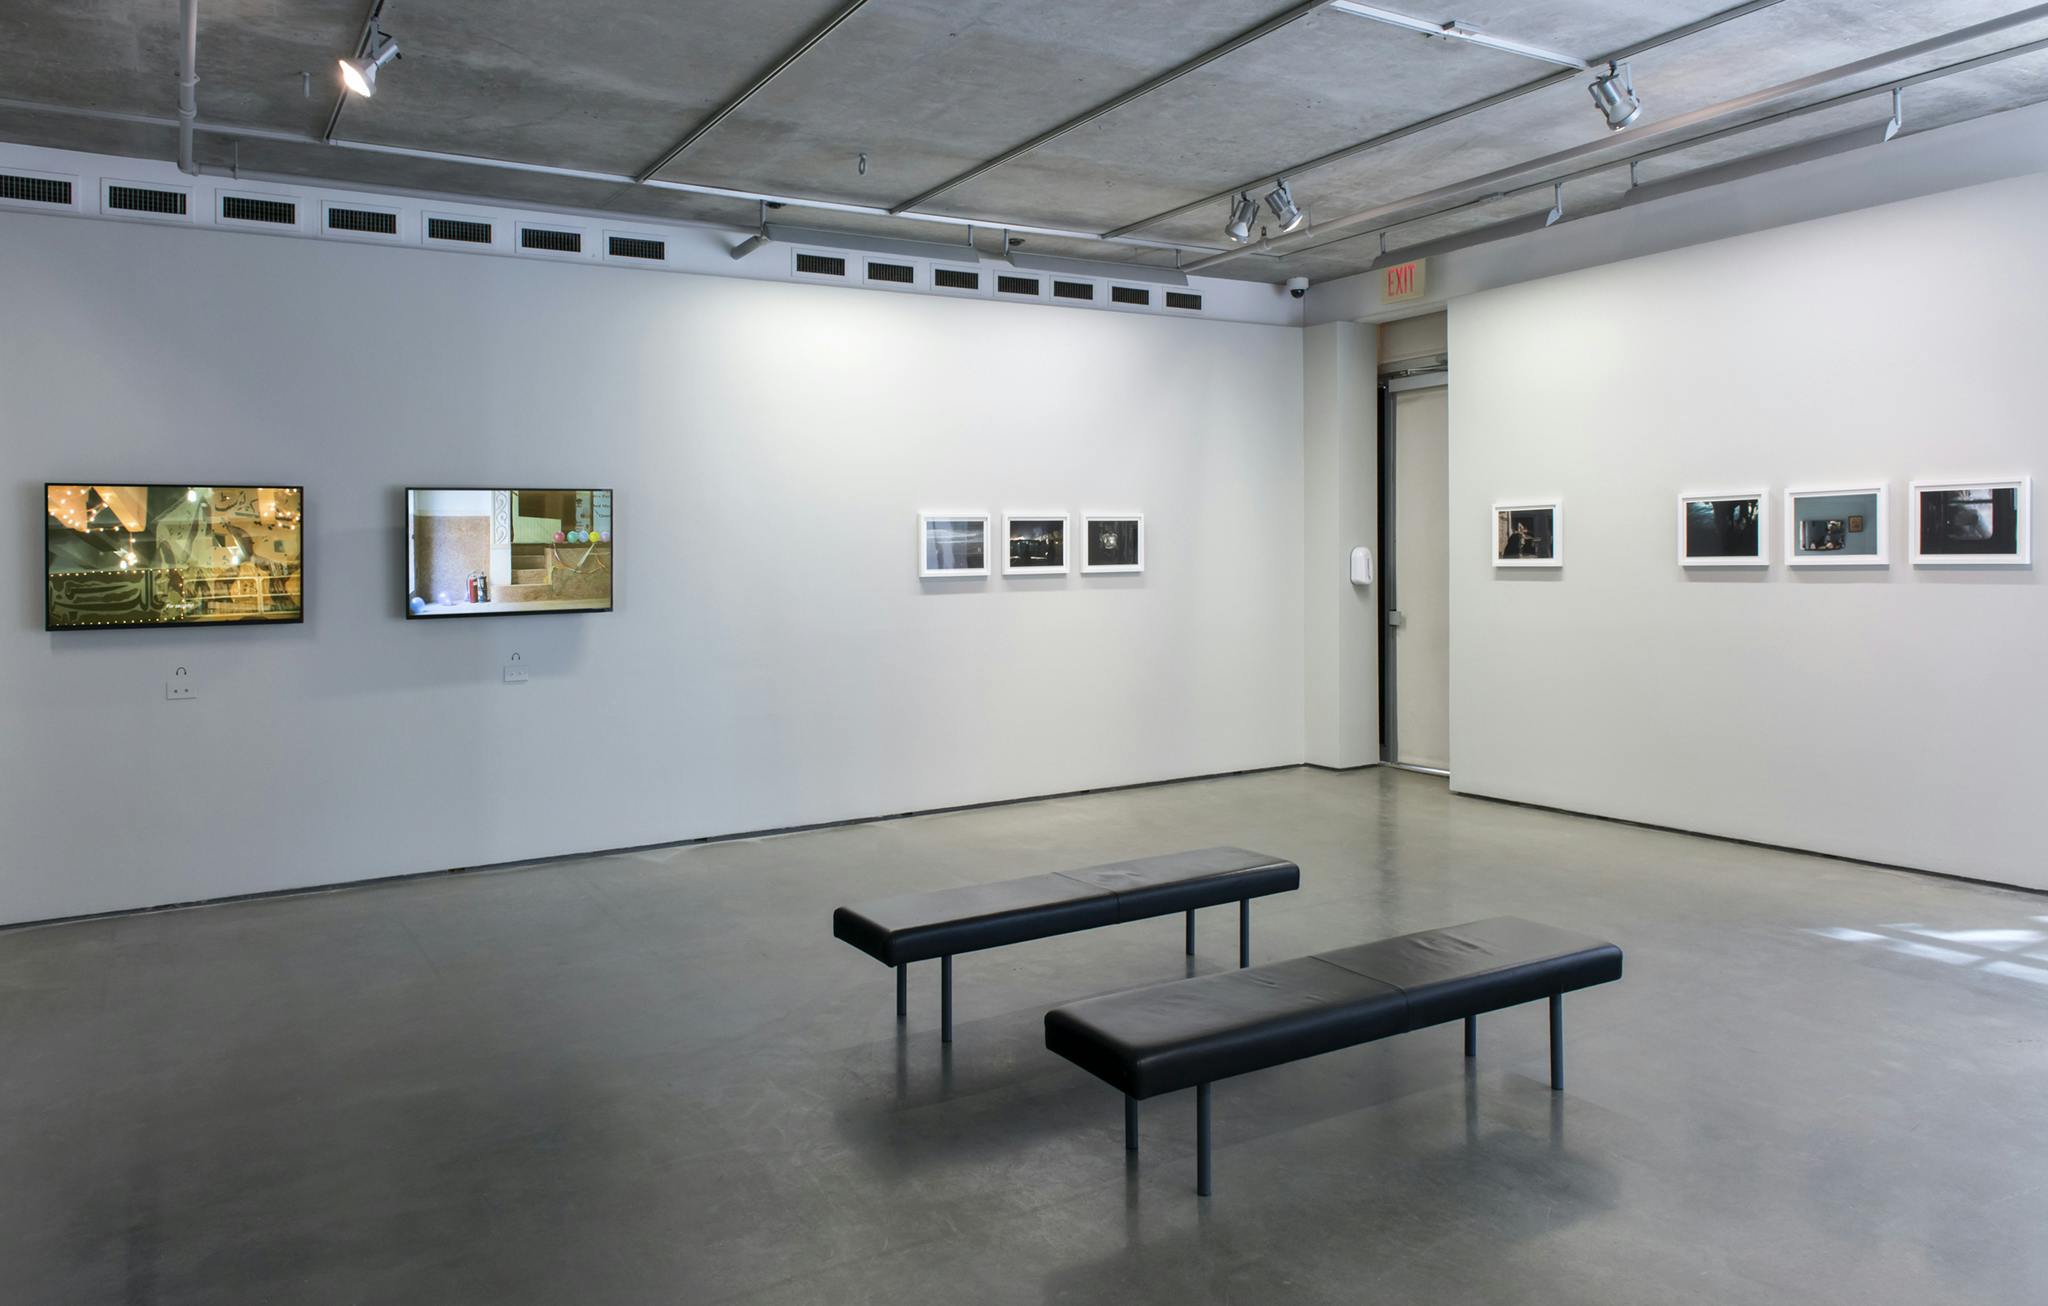 Seven framed photographs and two monitors hang on two gallery walls. The left wall has two monitors and three photographs, the right wall has four photographs. Two benches sit in front.